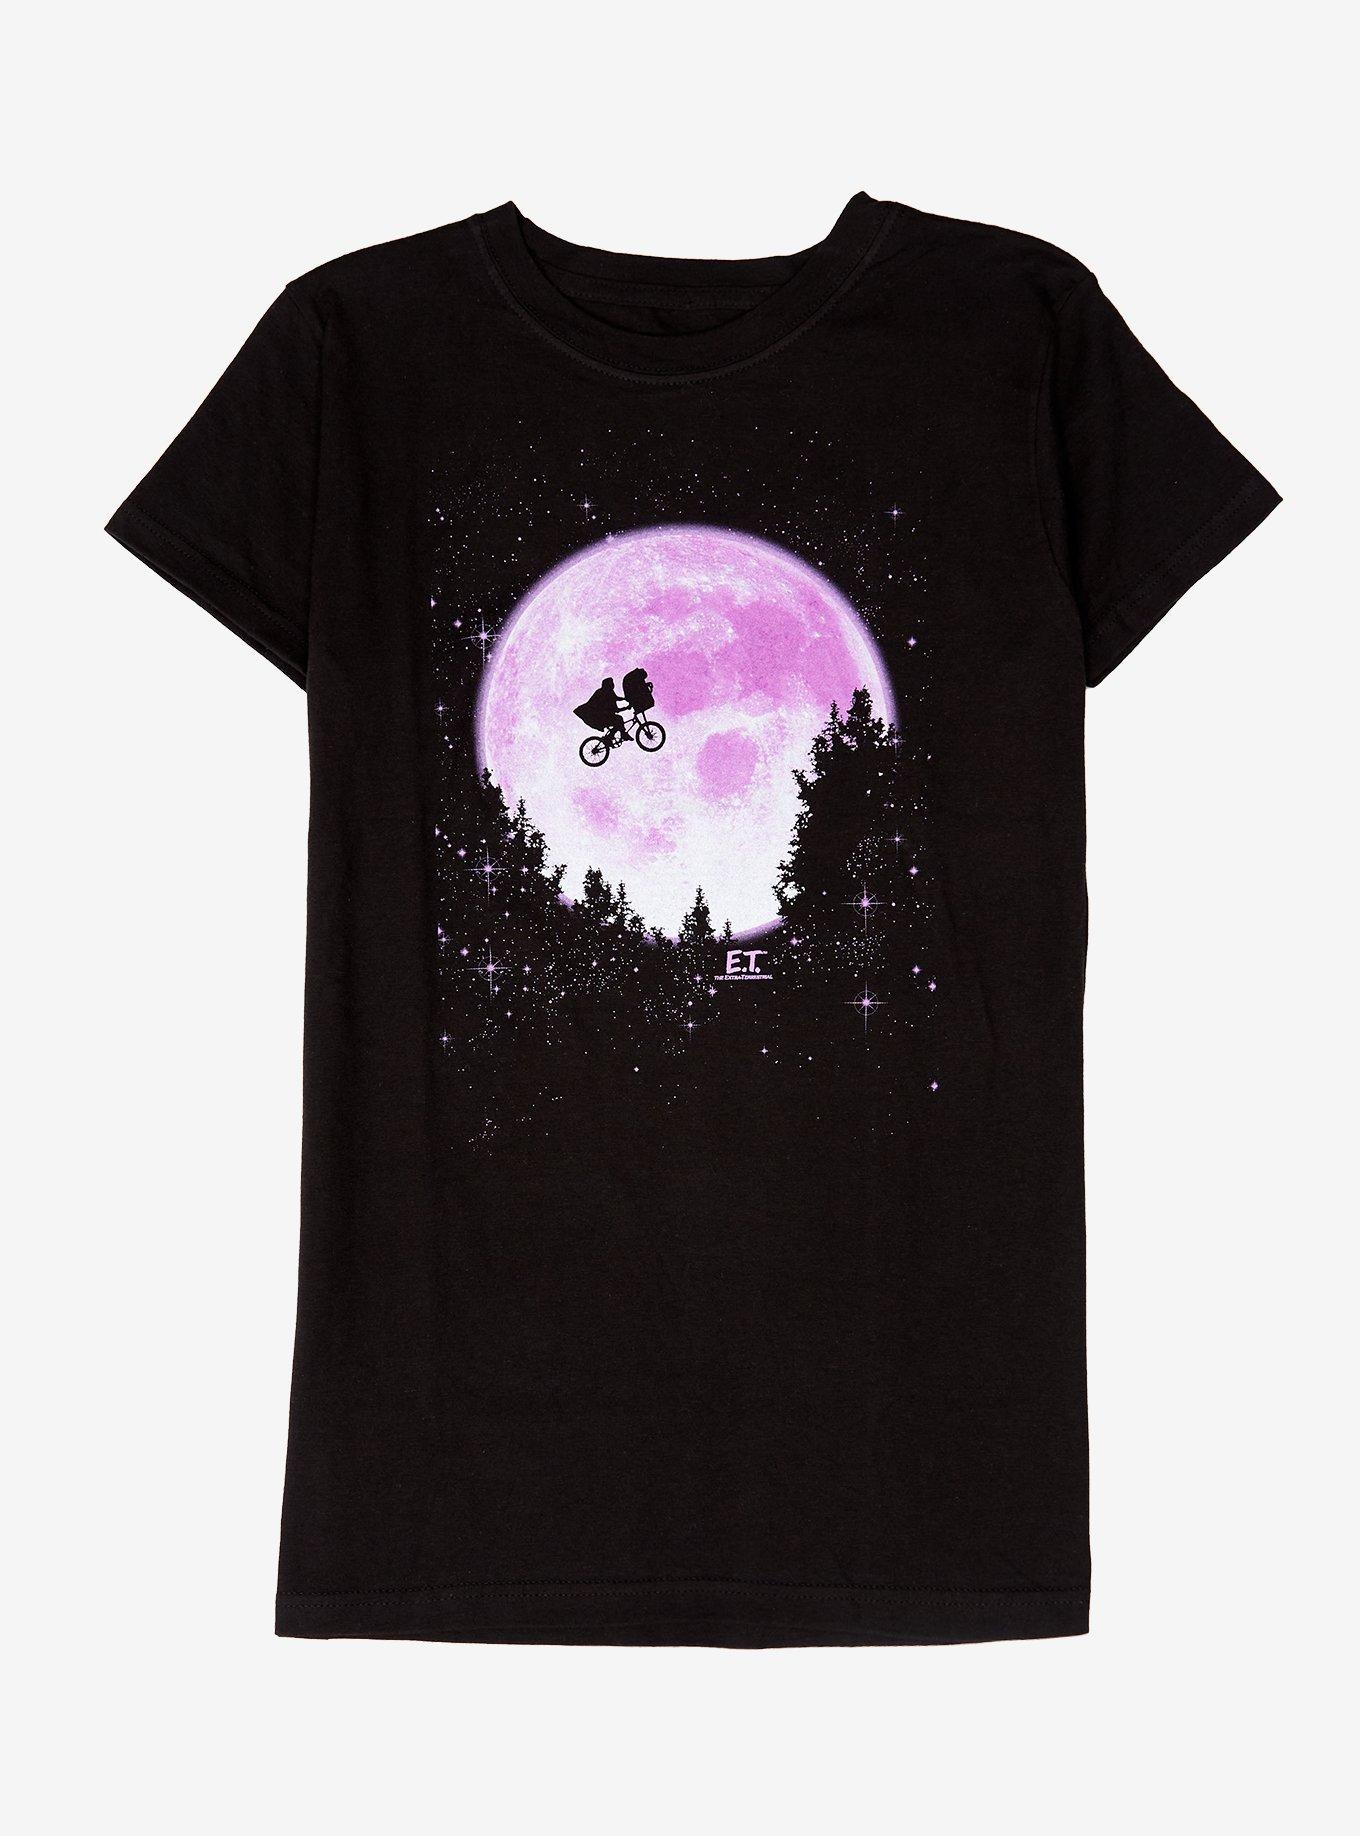 E.T. The Extra Terrestrial Moon Ride Girls T-Shirt, PINK, hi-res